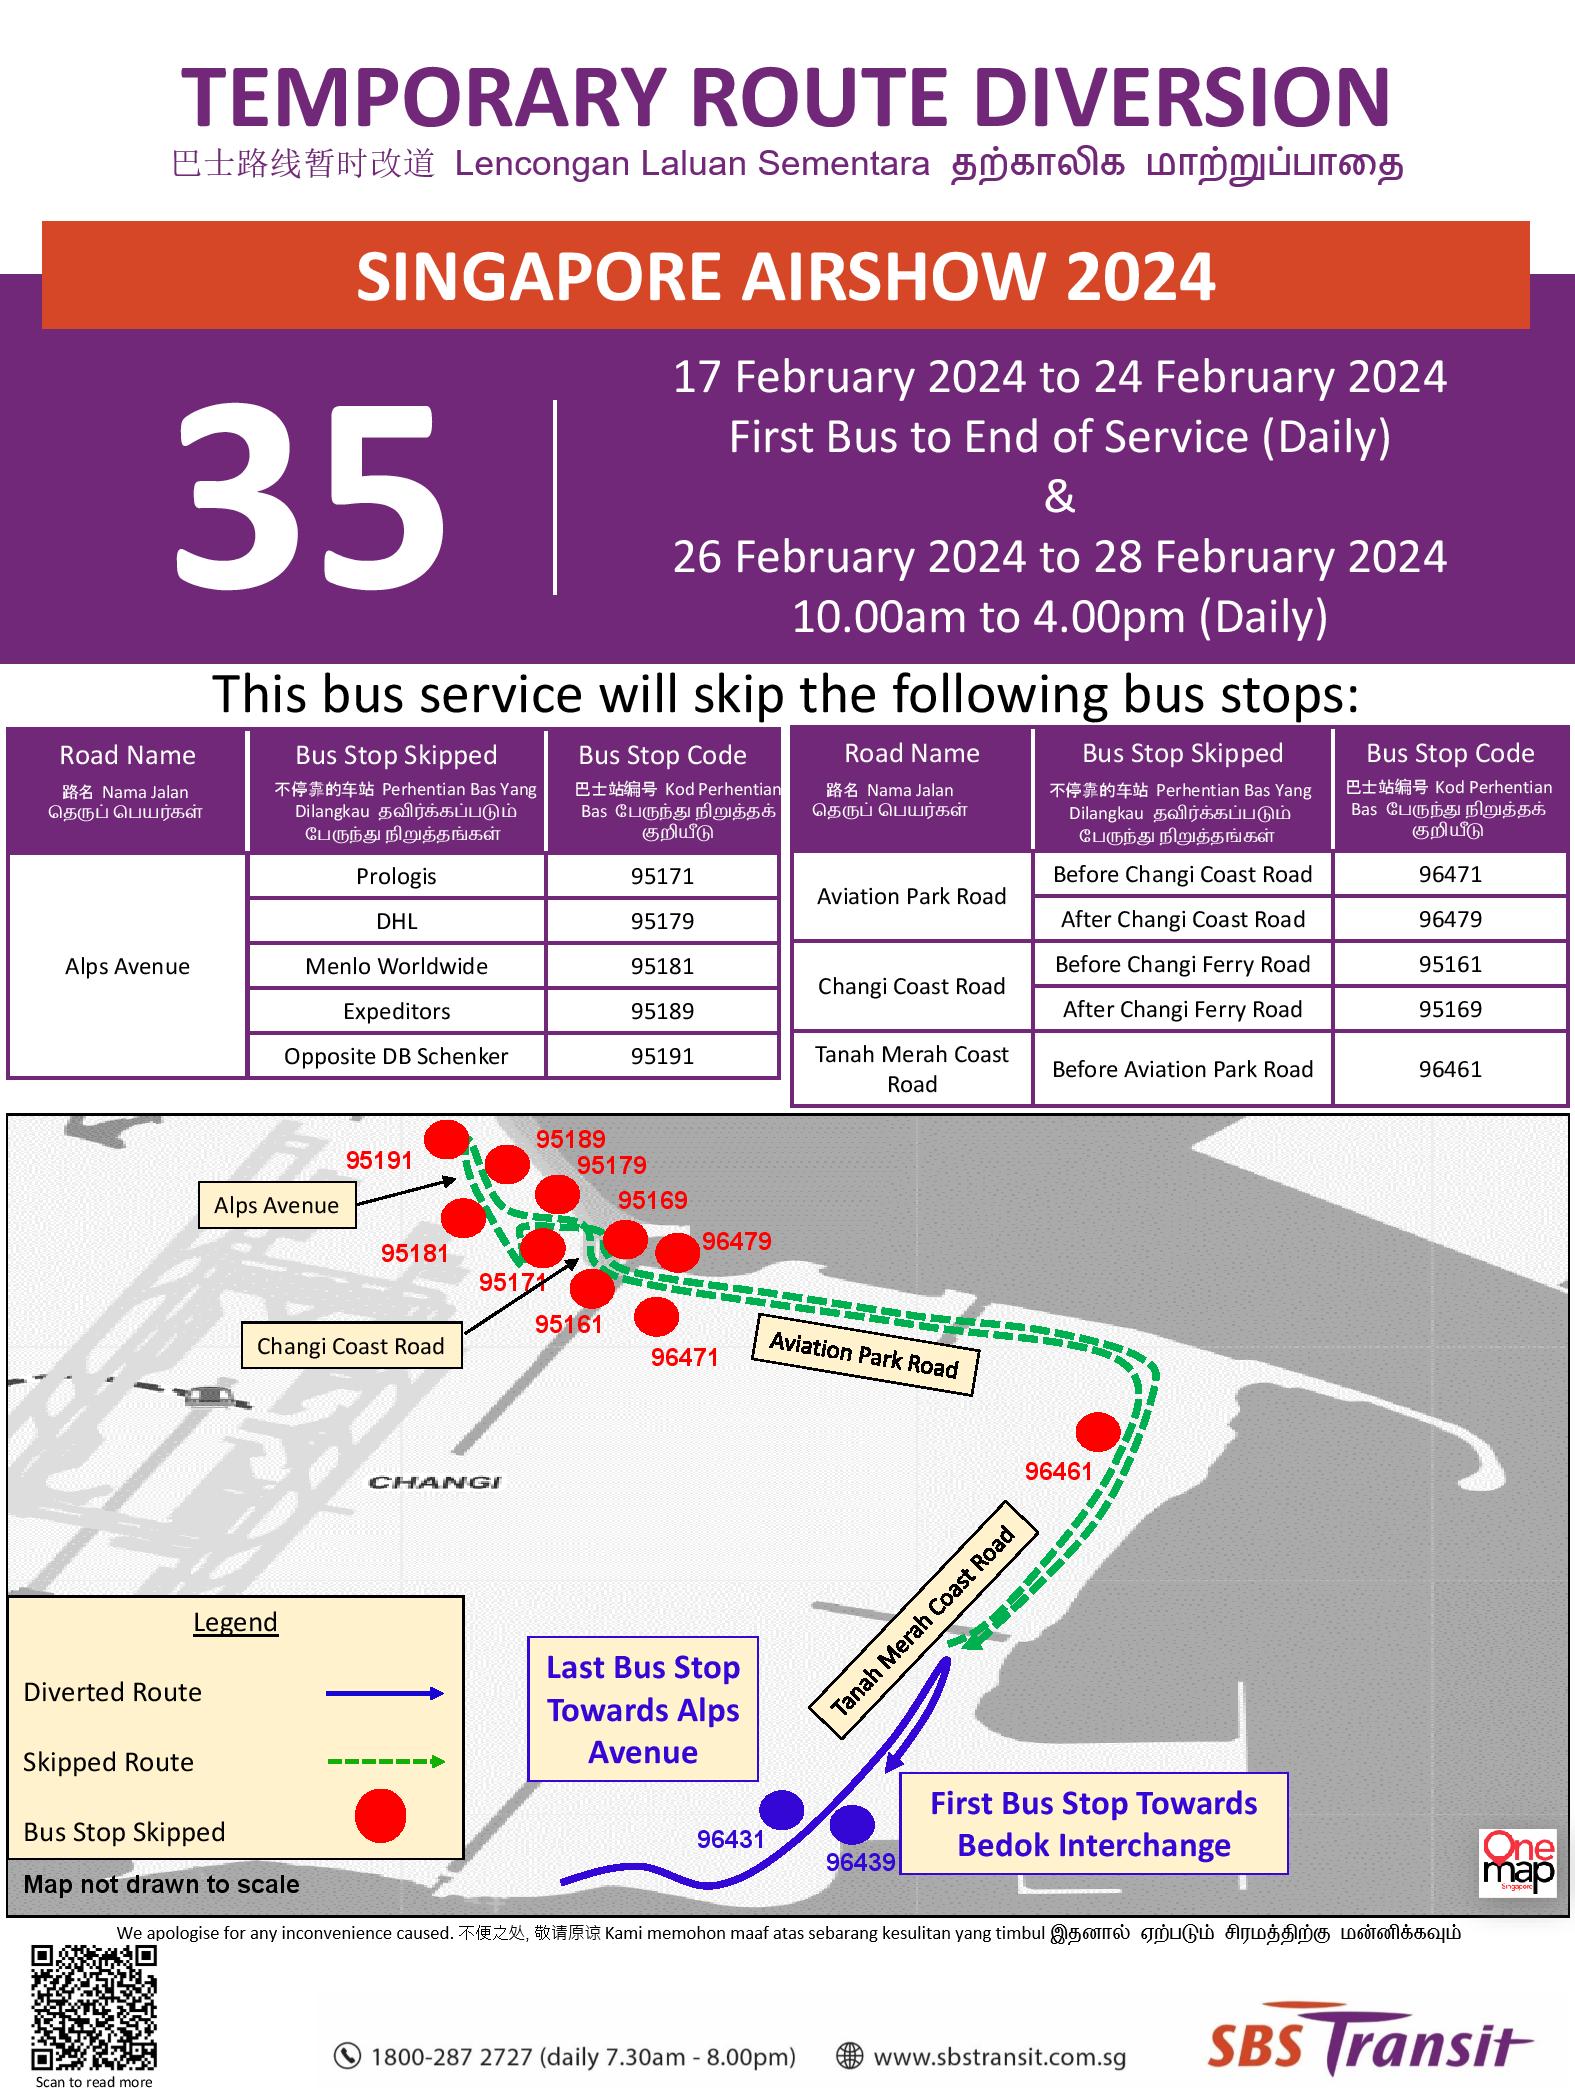 SBS Transit Temporary Route Diversion Poster for Singapore Airshow 2024